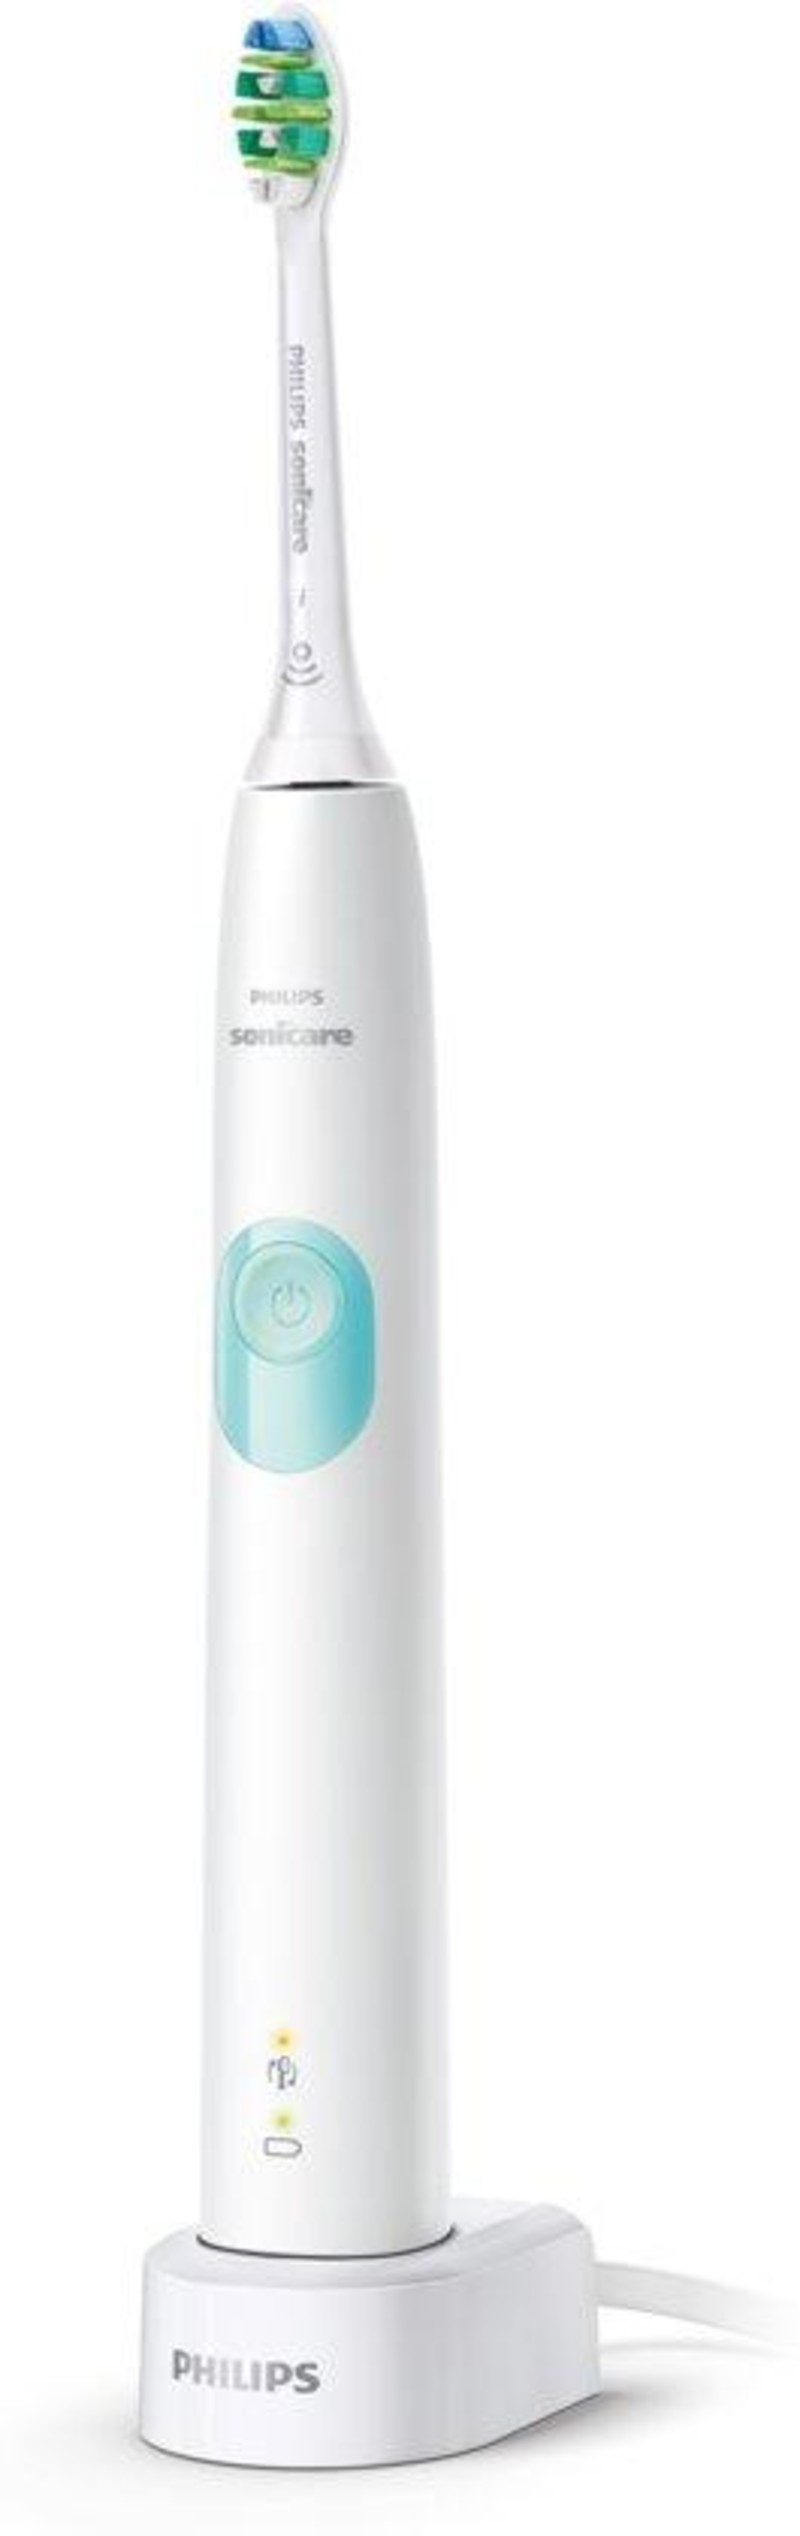 Protective Clean | Philips Sonicare Super teeth - We Are Eves: honest reviews.